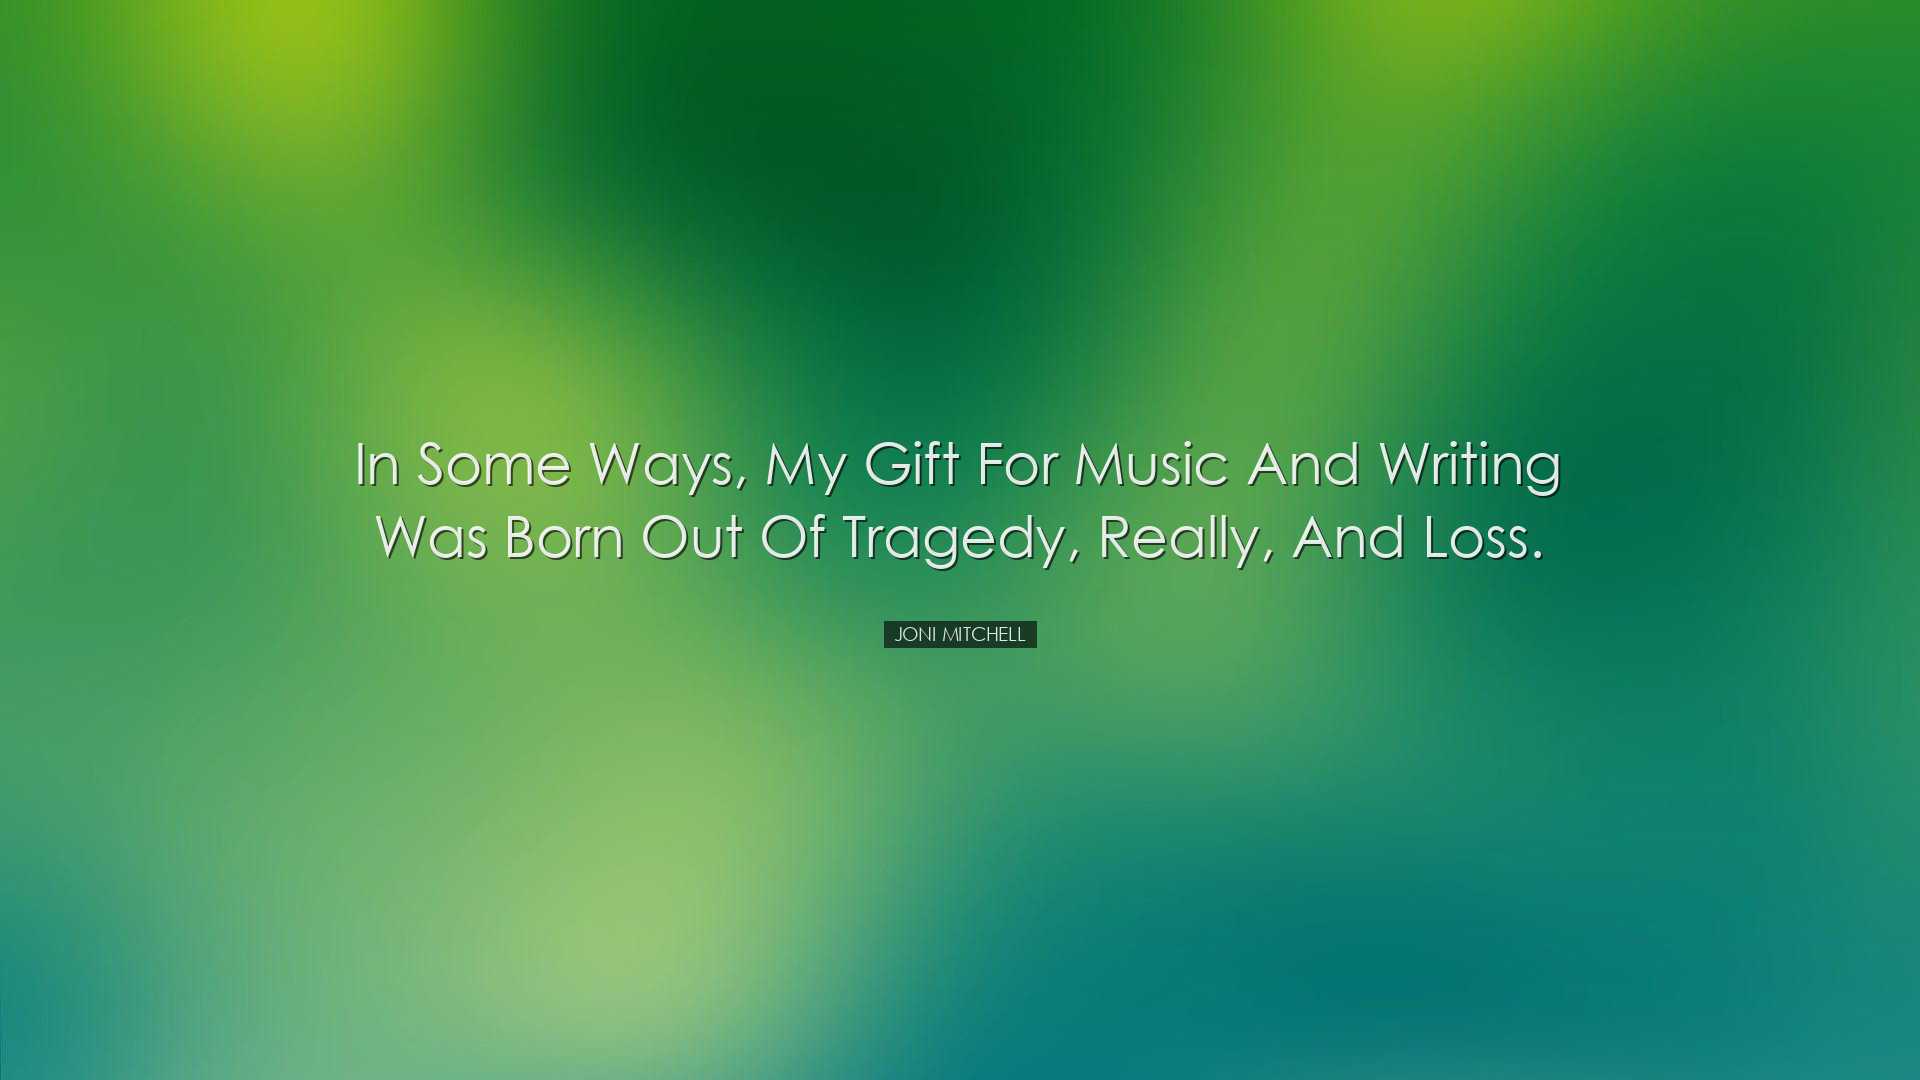 In some ways, my gift for music and writing was born out of traged